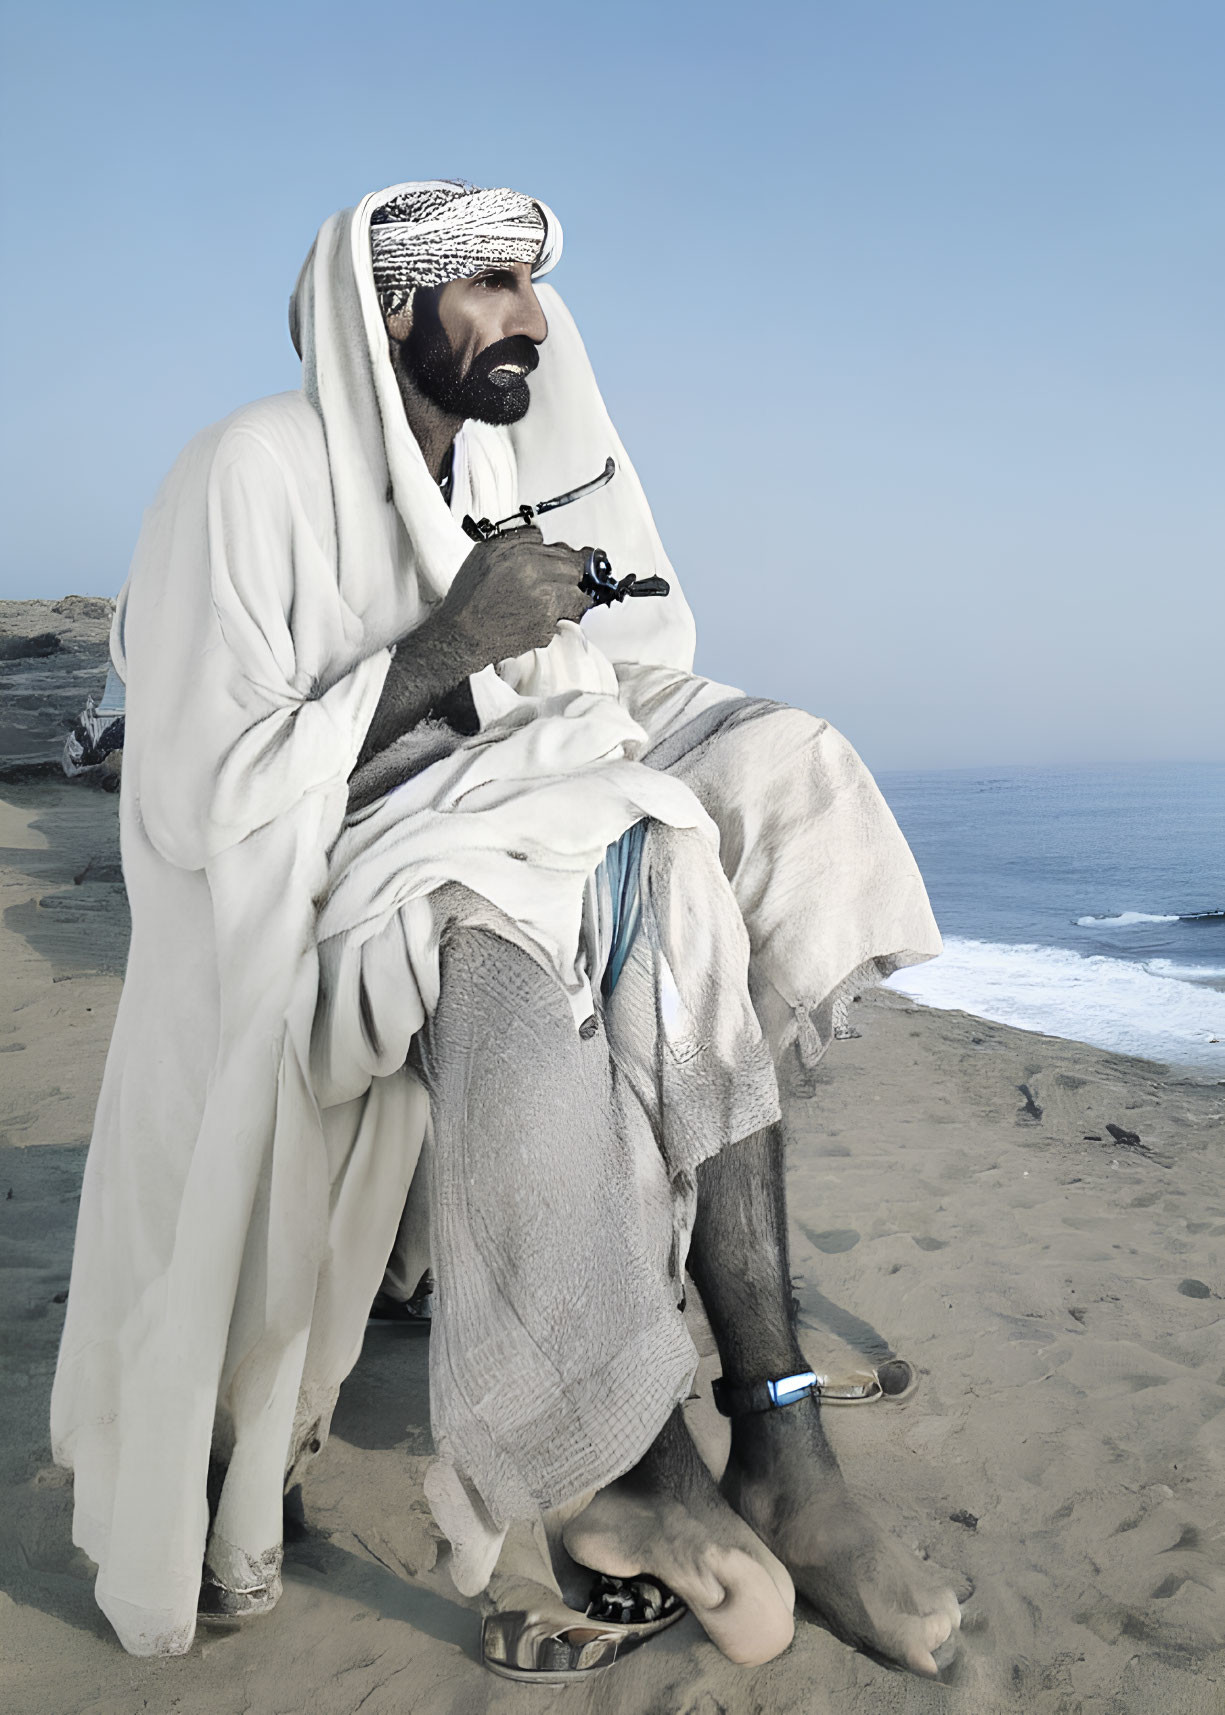 Man in traditional attire smoking pipe on sandy beach